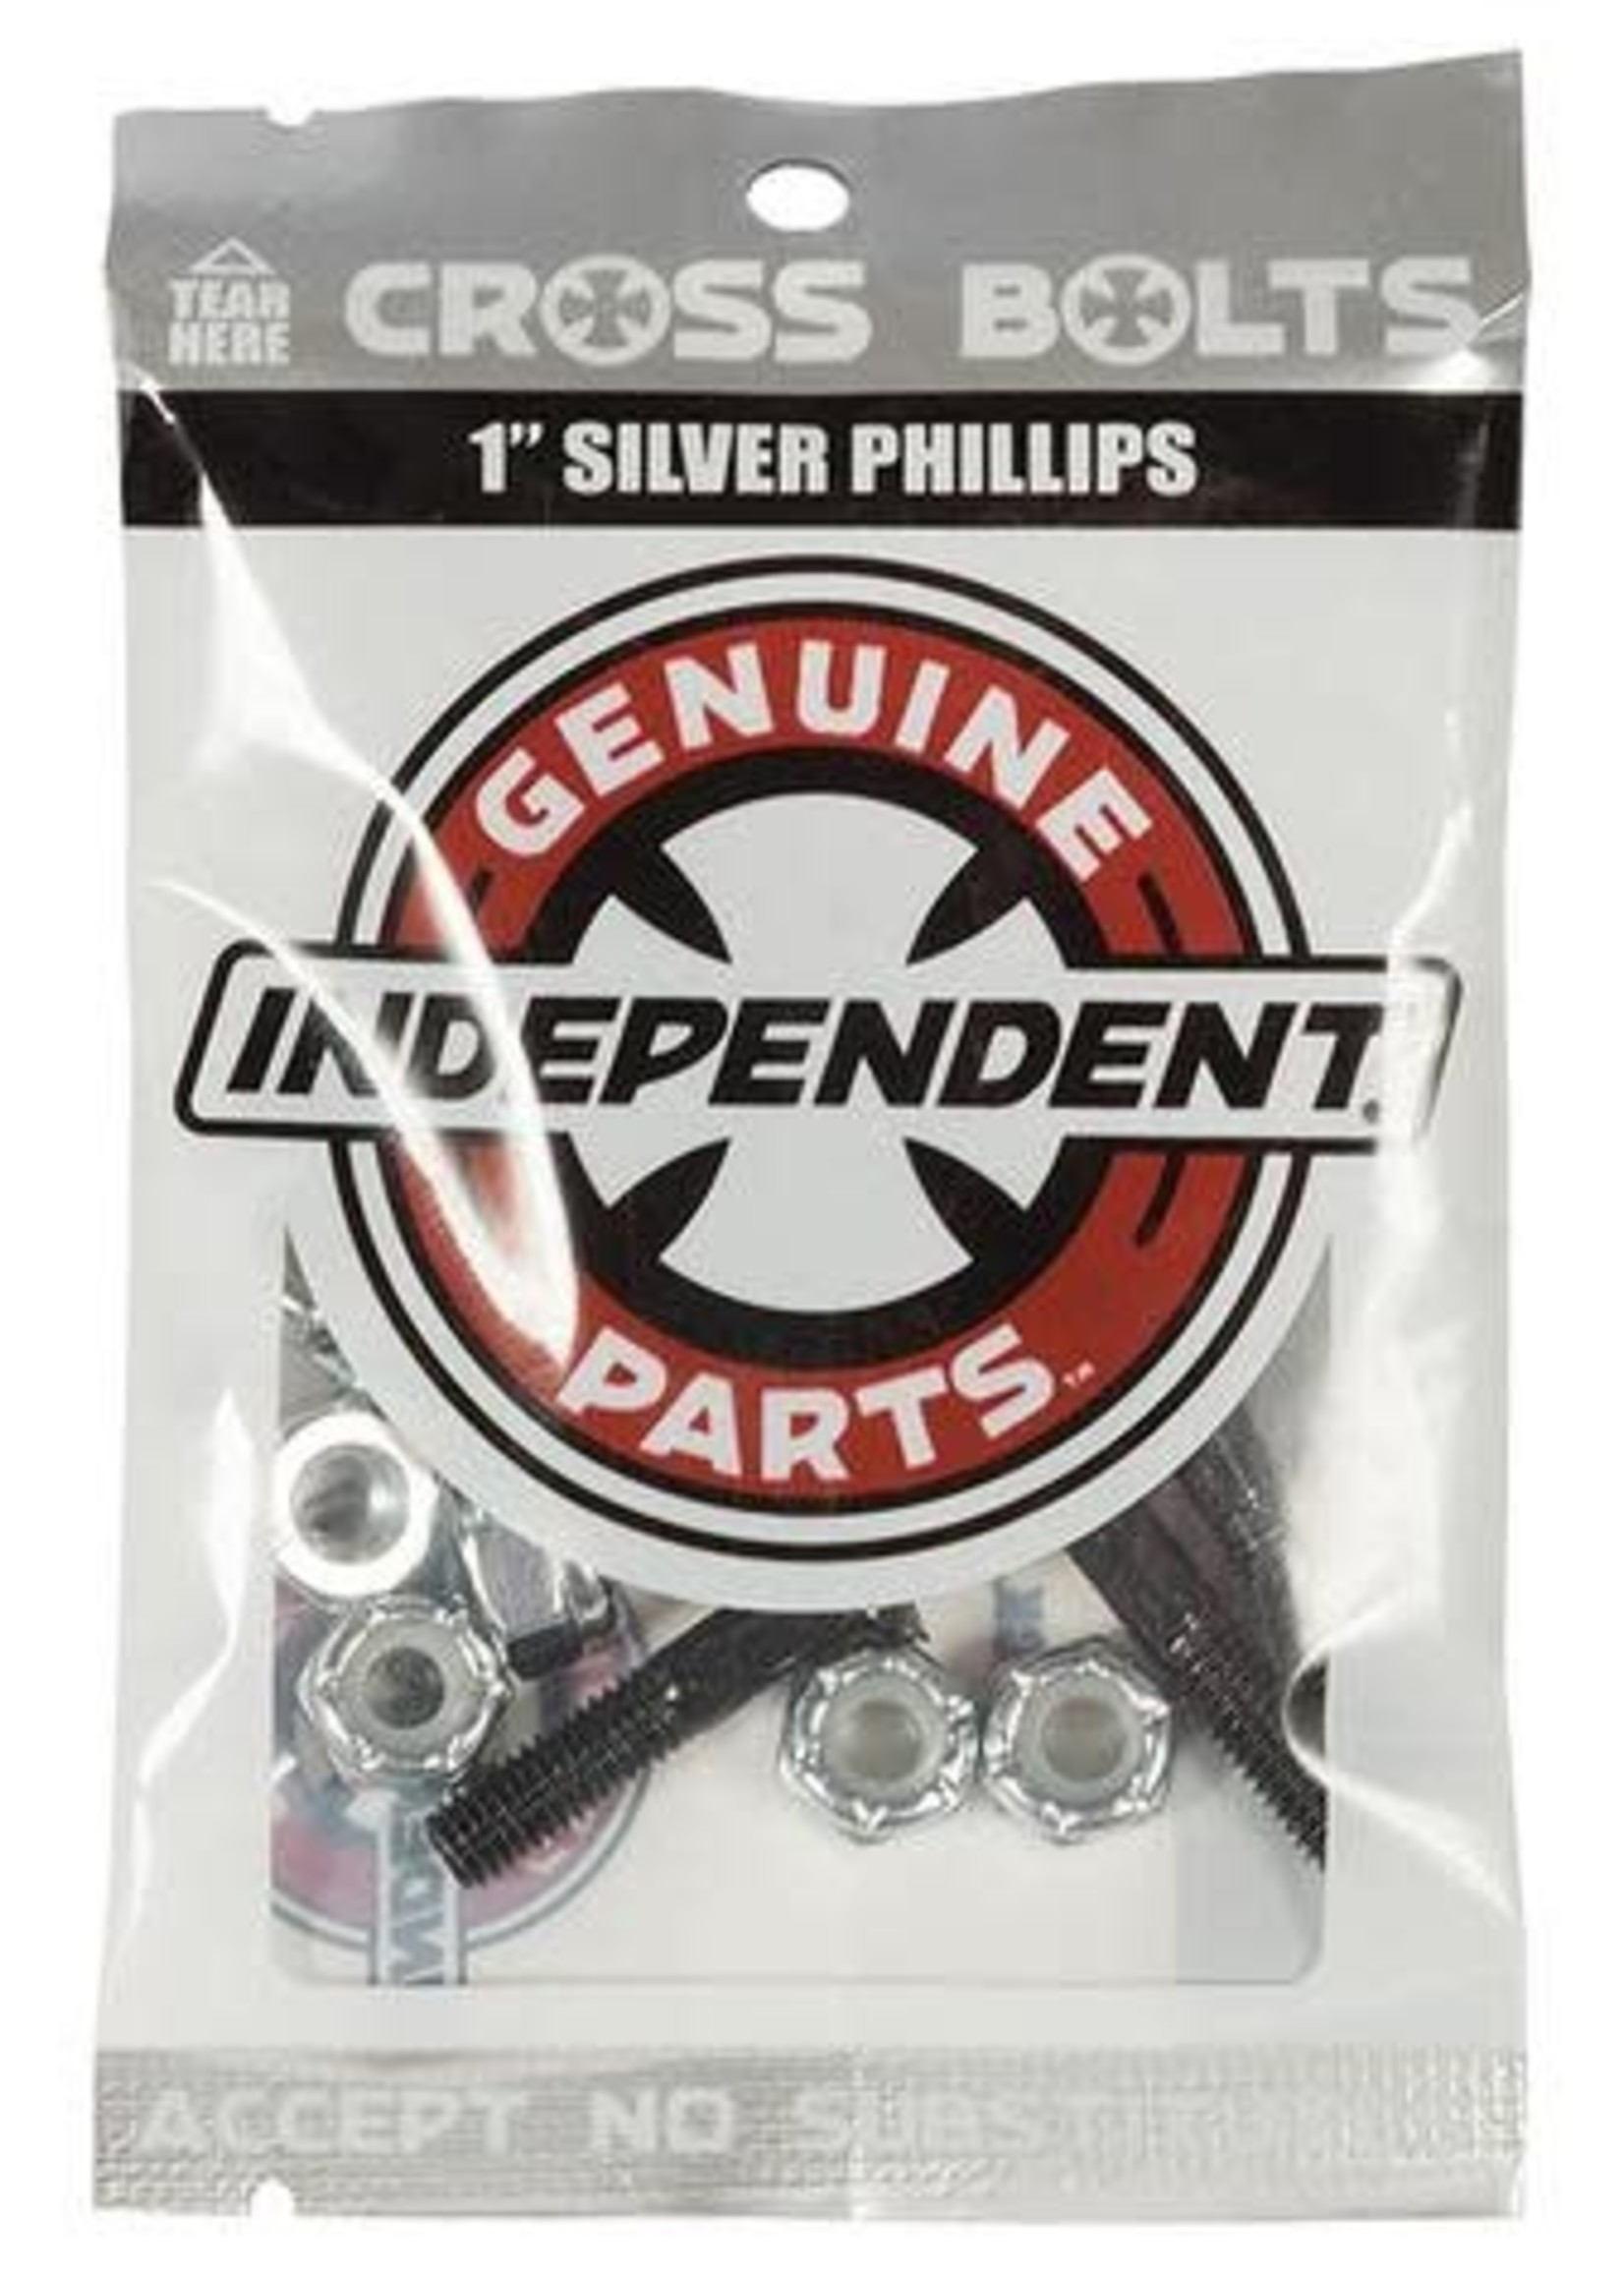 Independent Cross Bolts silver